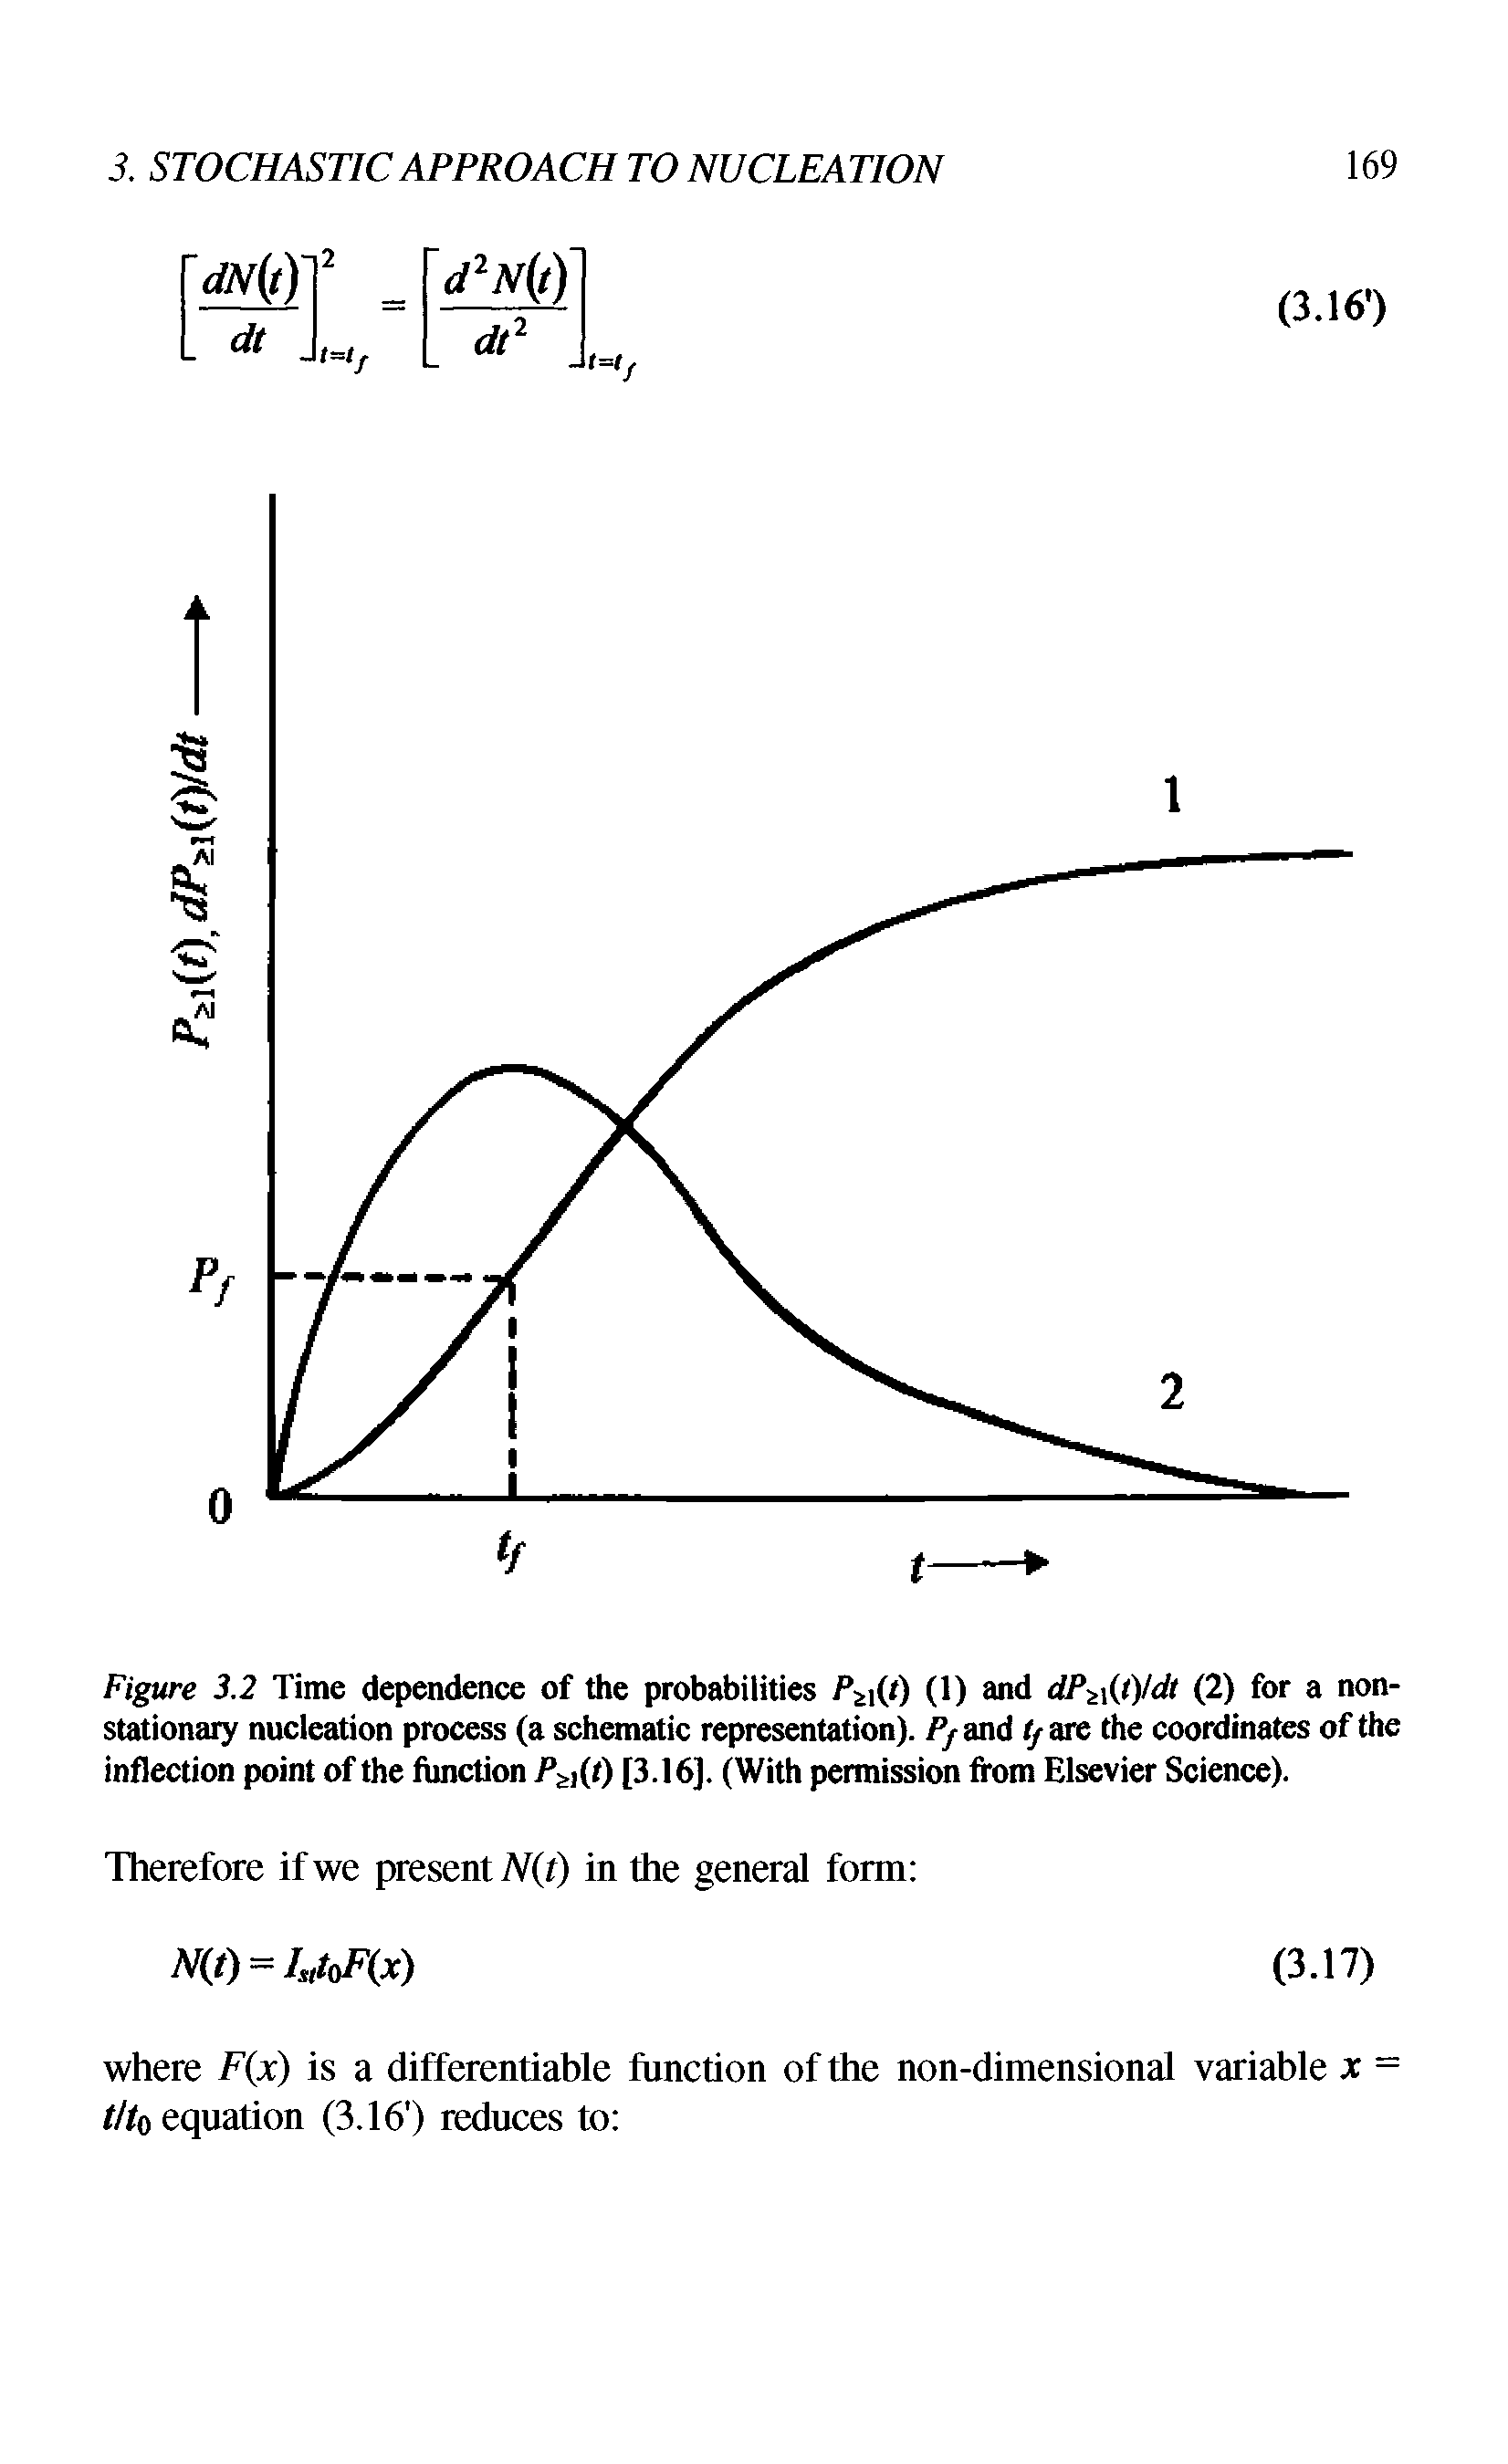 Figure 3.2 Time dependence of the probabilities Pi t) (1) and dPn ()ldt (2) for a non-stationaiy nucleation process (a schematic representation), / /and are the cooidinates of the inflection point of the function [3.16]. (With permission fh>m Elsevier Science).